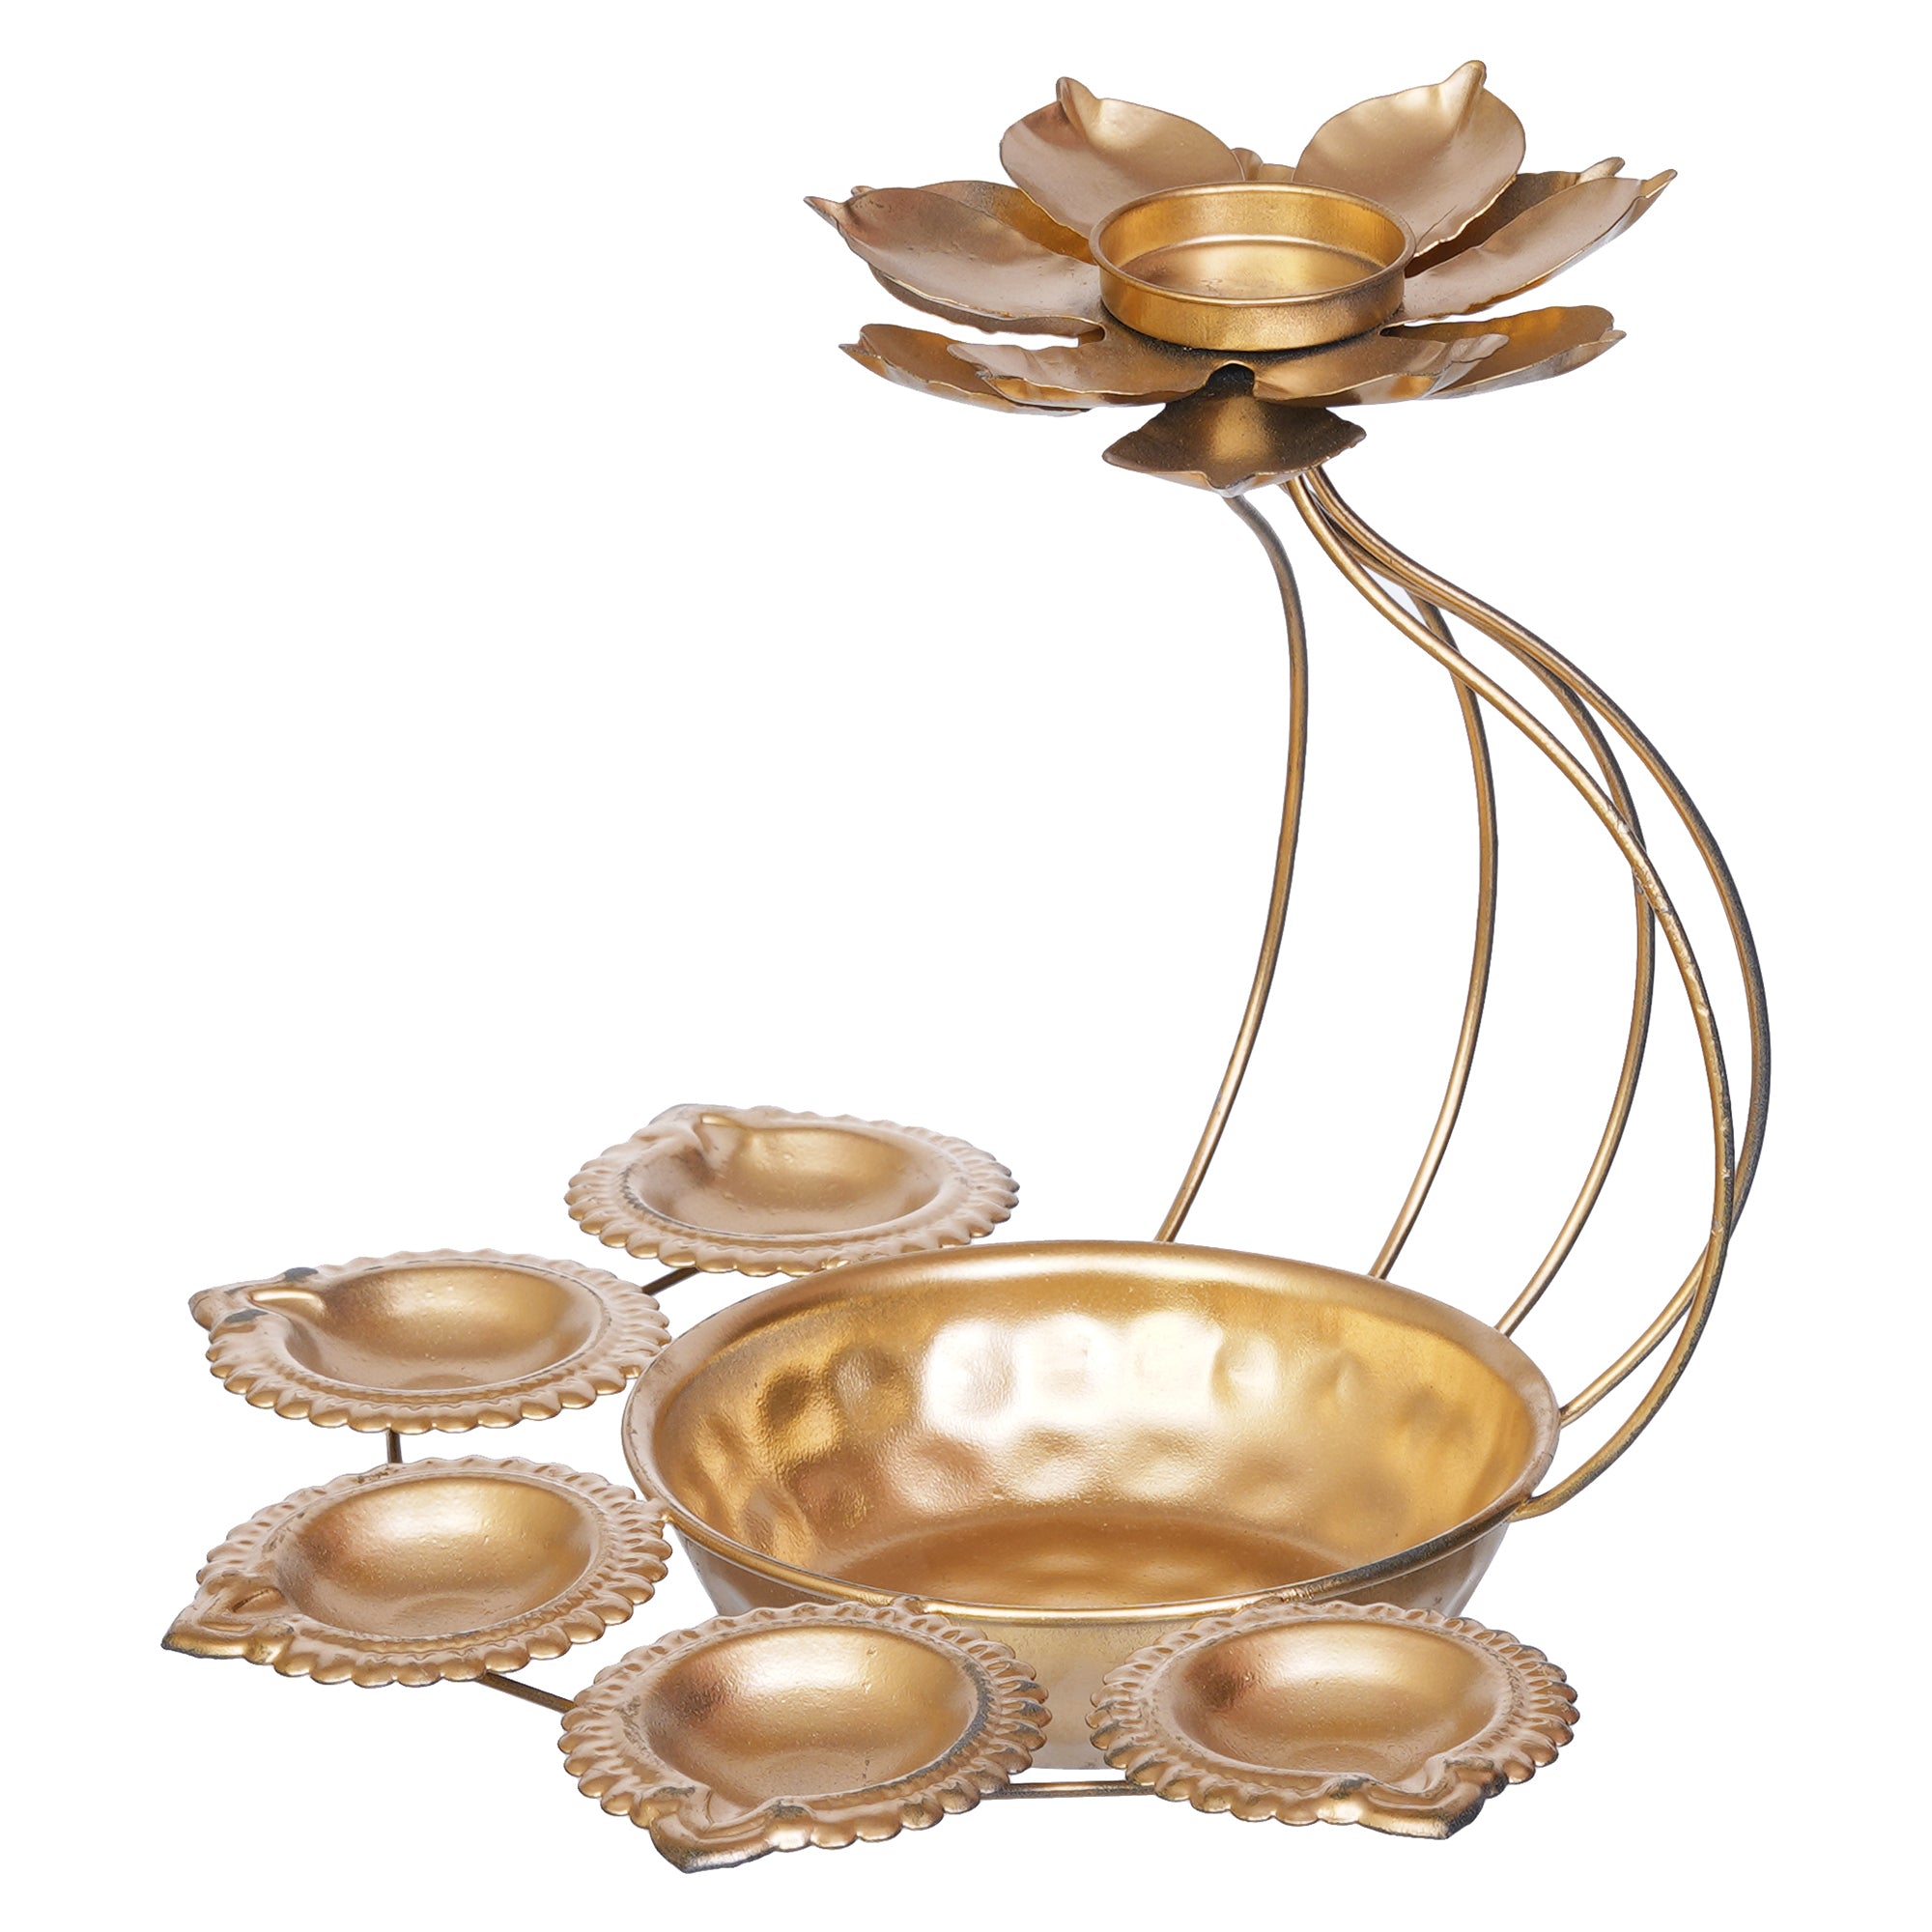 Golden Metal Handcrafted Lotus Shaped Decorative Urli with Tea Light Candle Holder 6